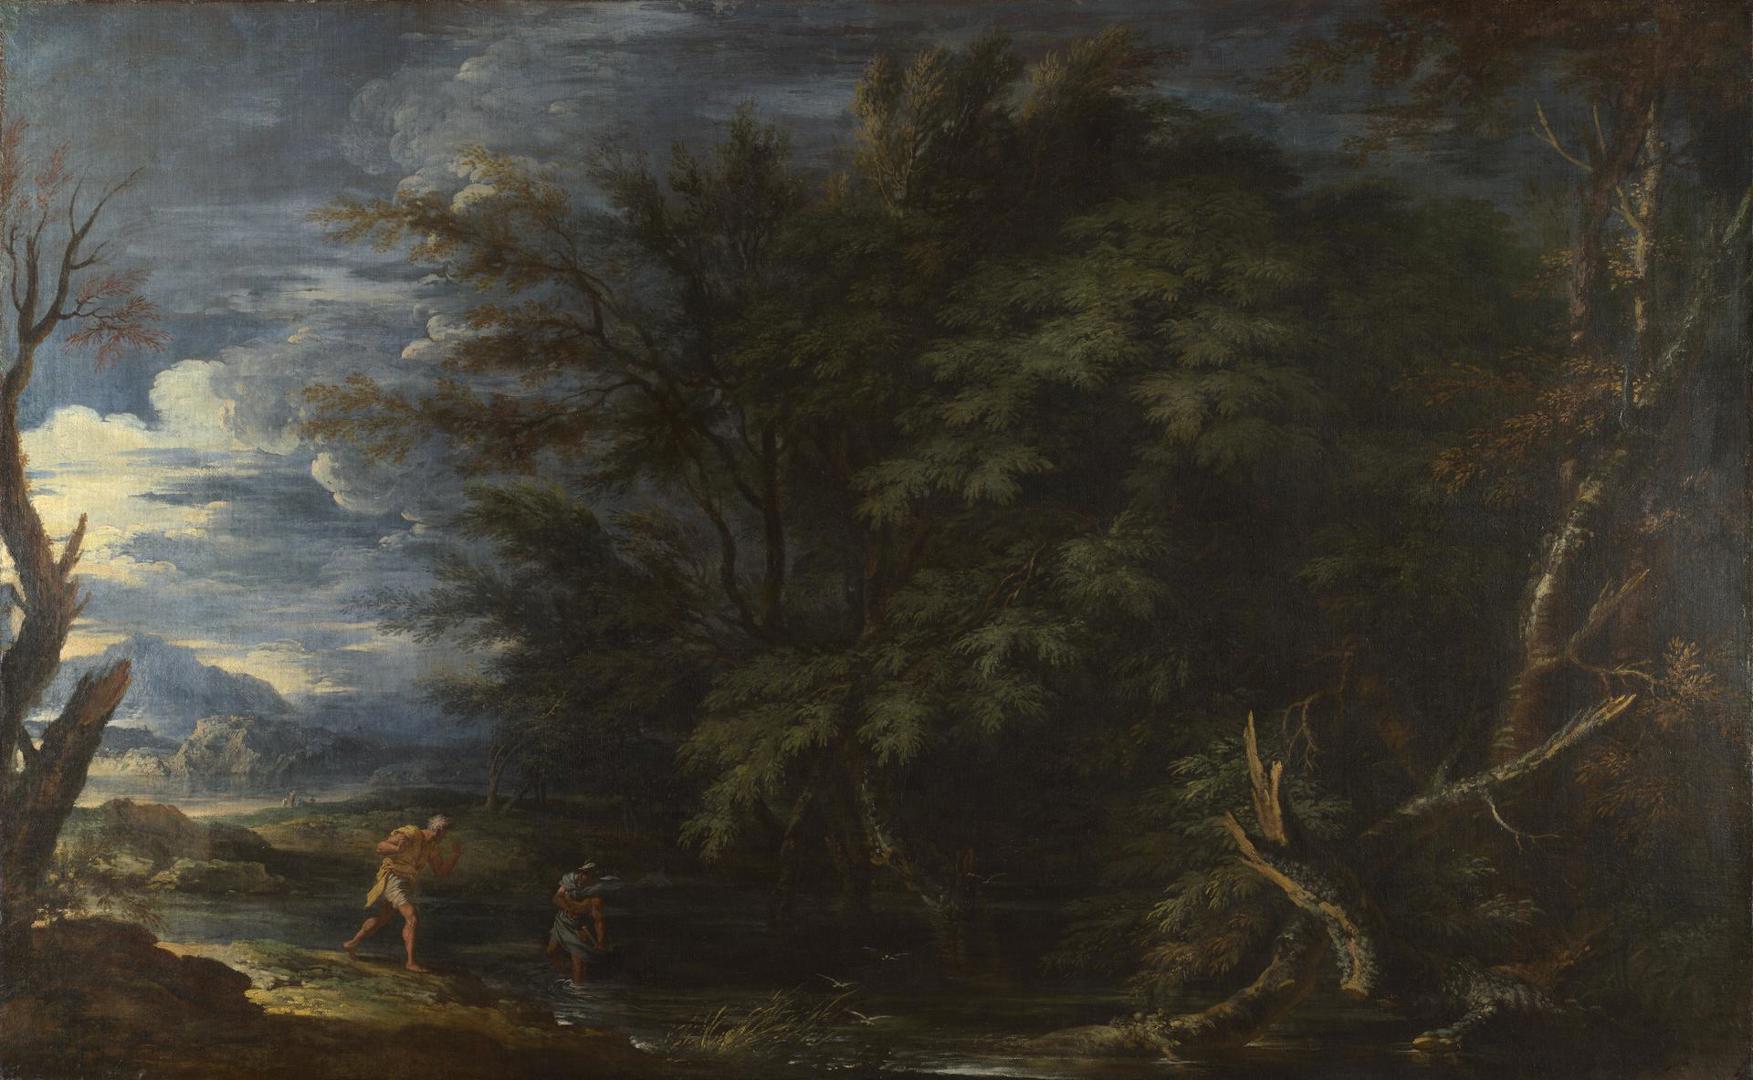 Landscape with Mercury and the Dishonest Woodsman by Salvator Rosa